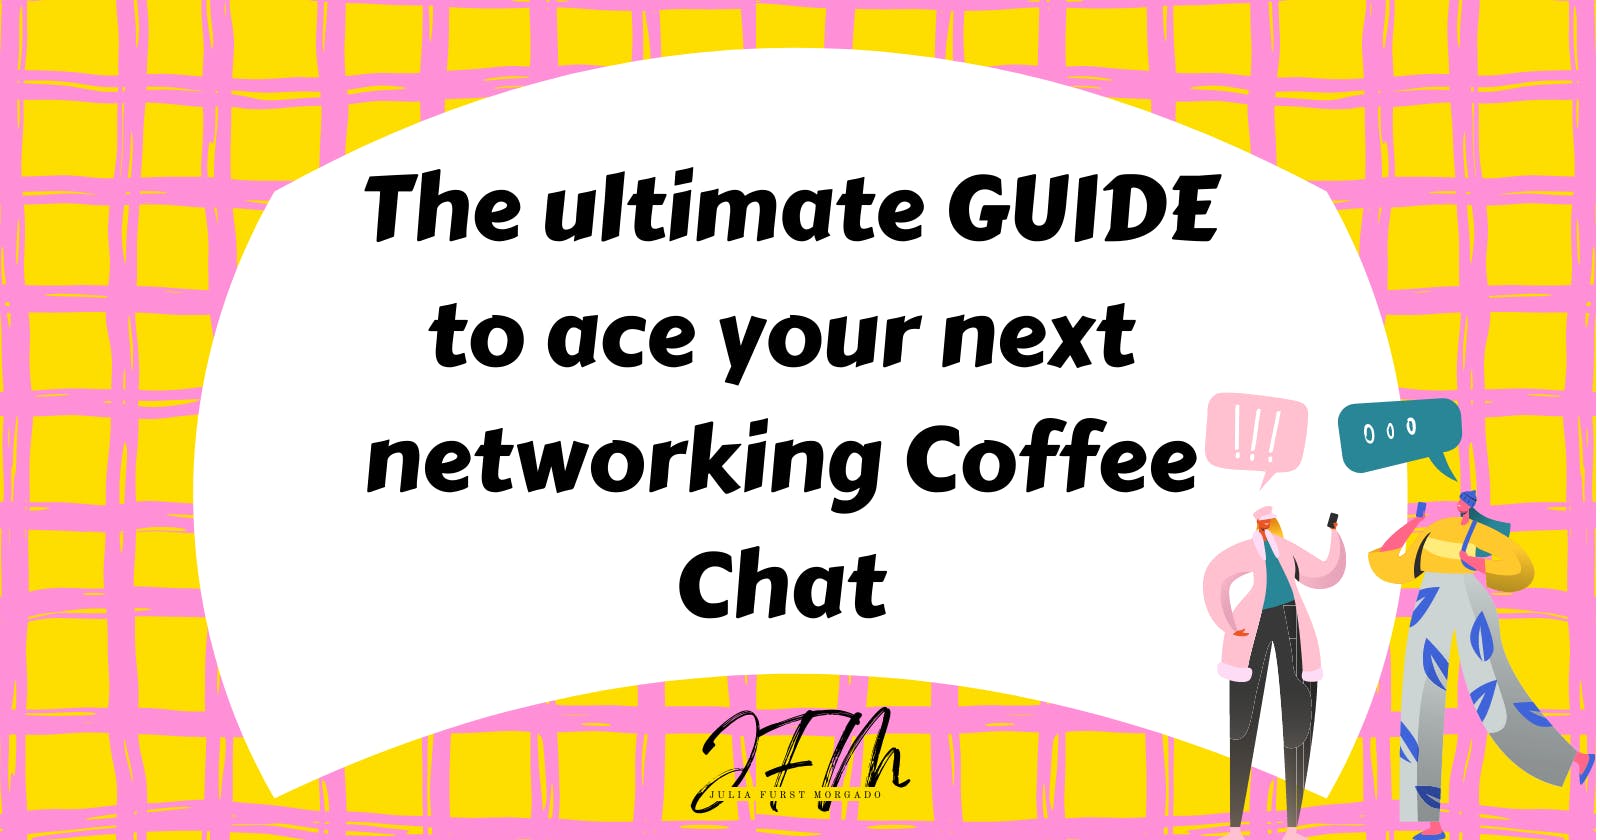 The Complete Guide to Ace Your Next Networking Coffee Chat